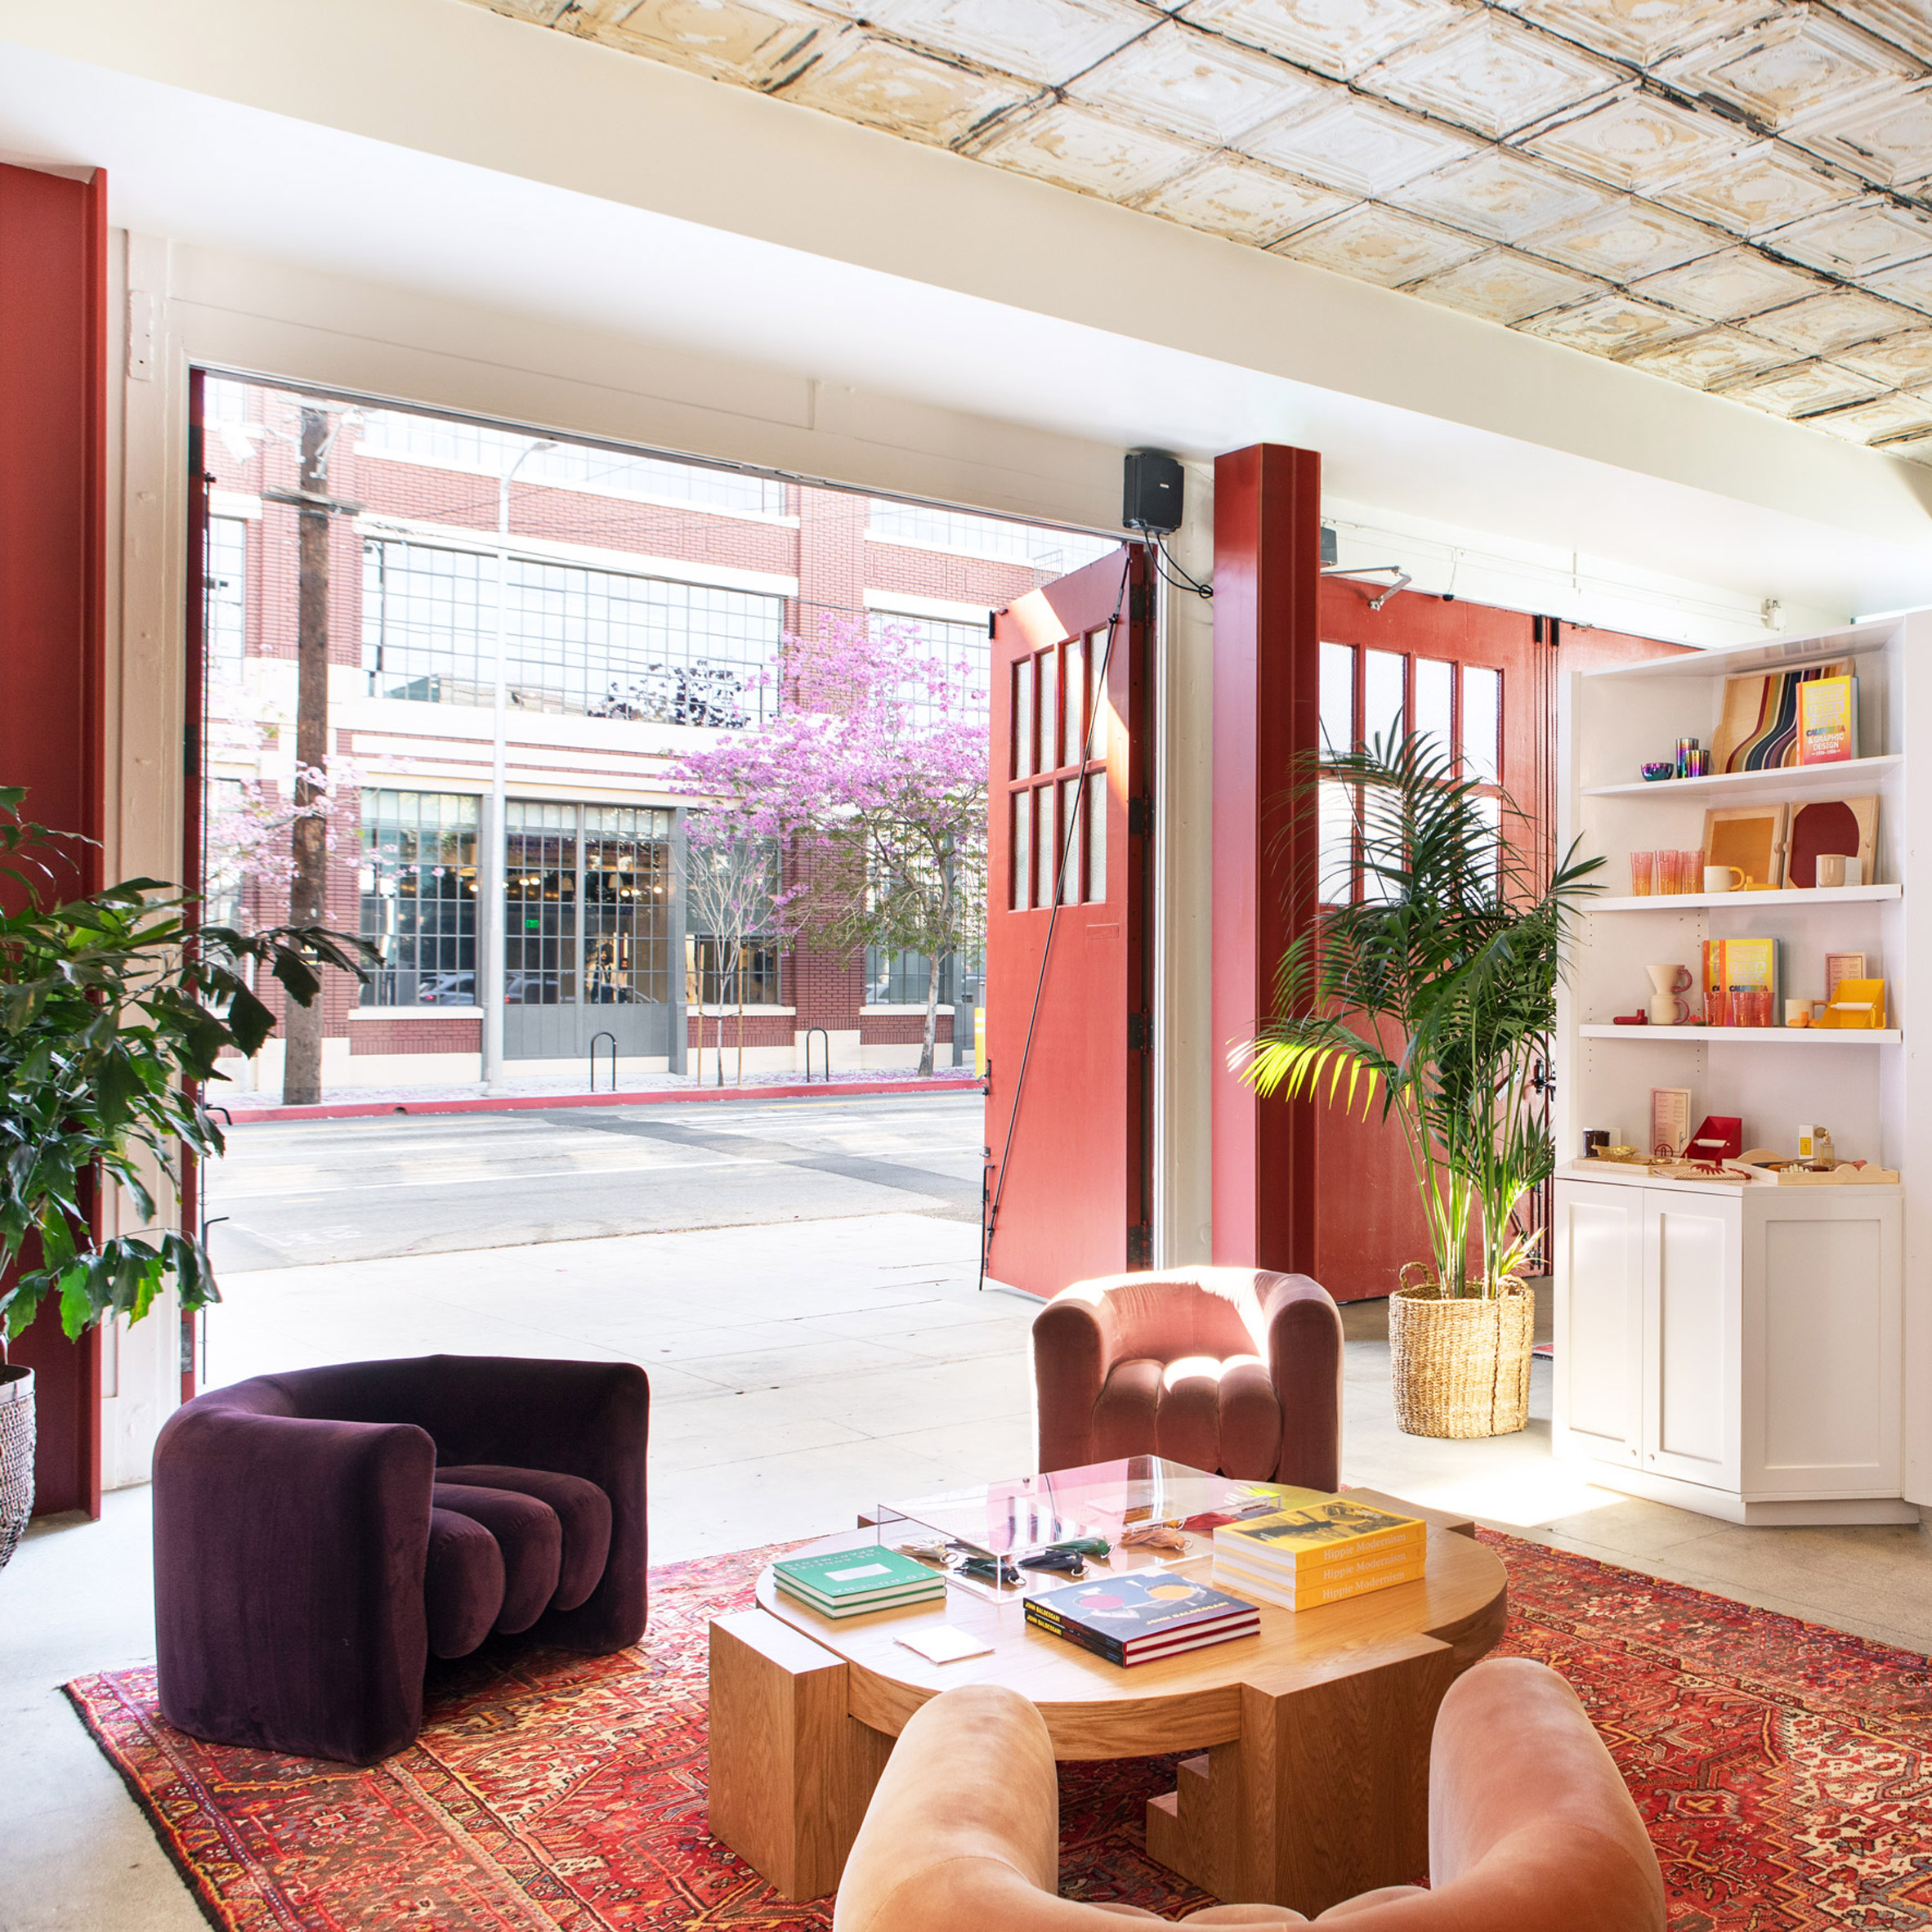 Los Angeles Firehouse Becomes Boutique Hotel Fronted By Red Garage